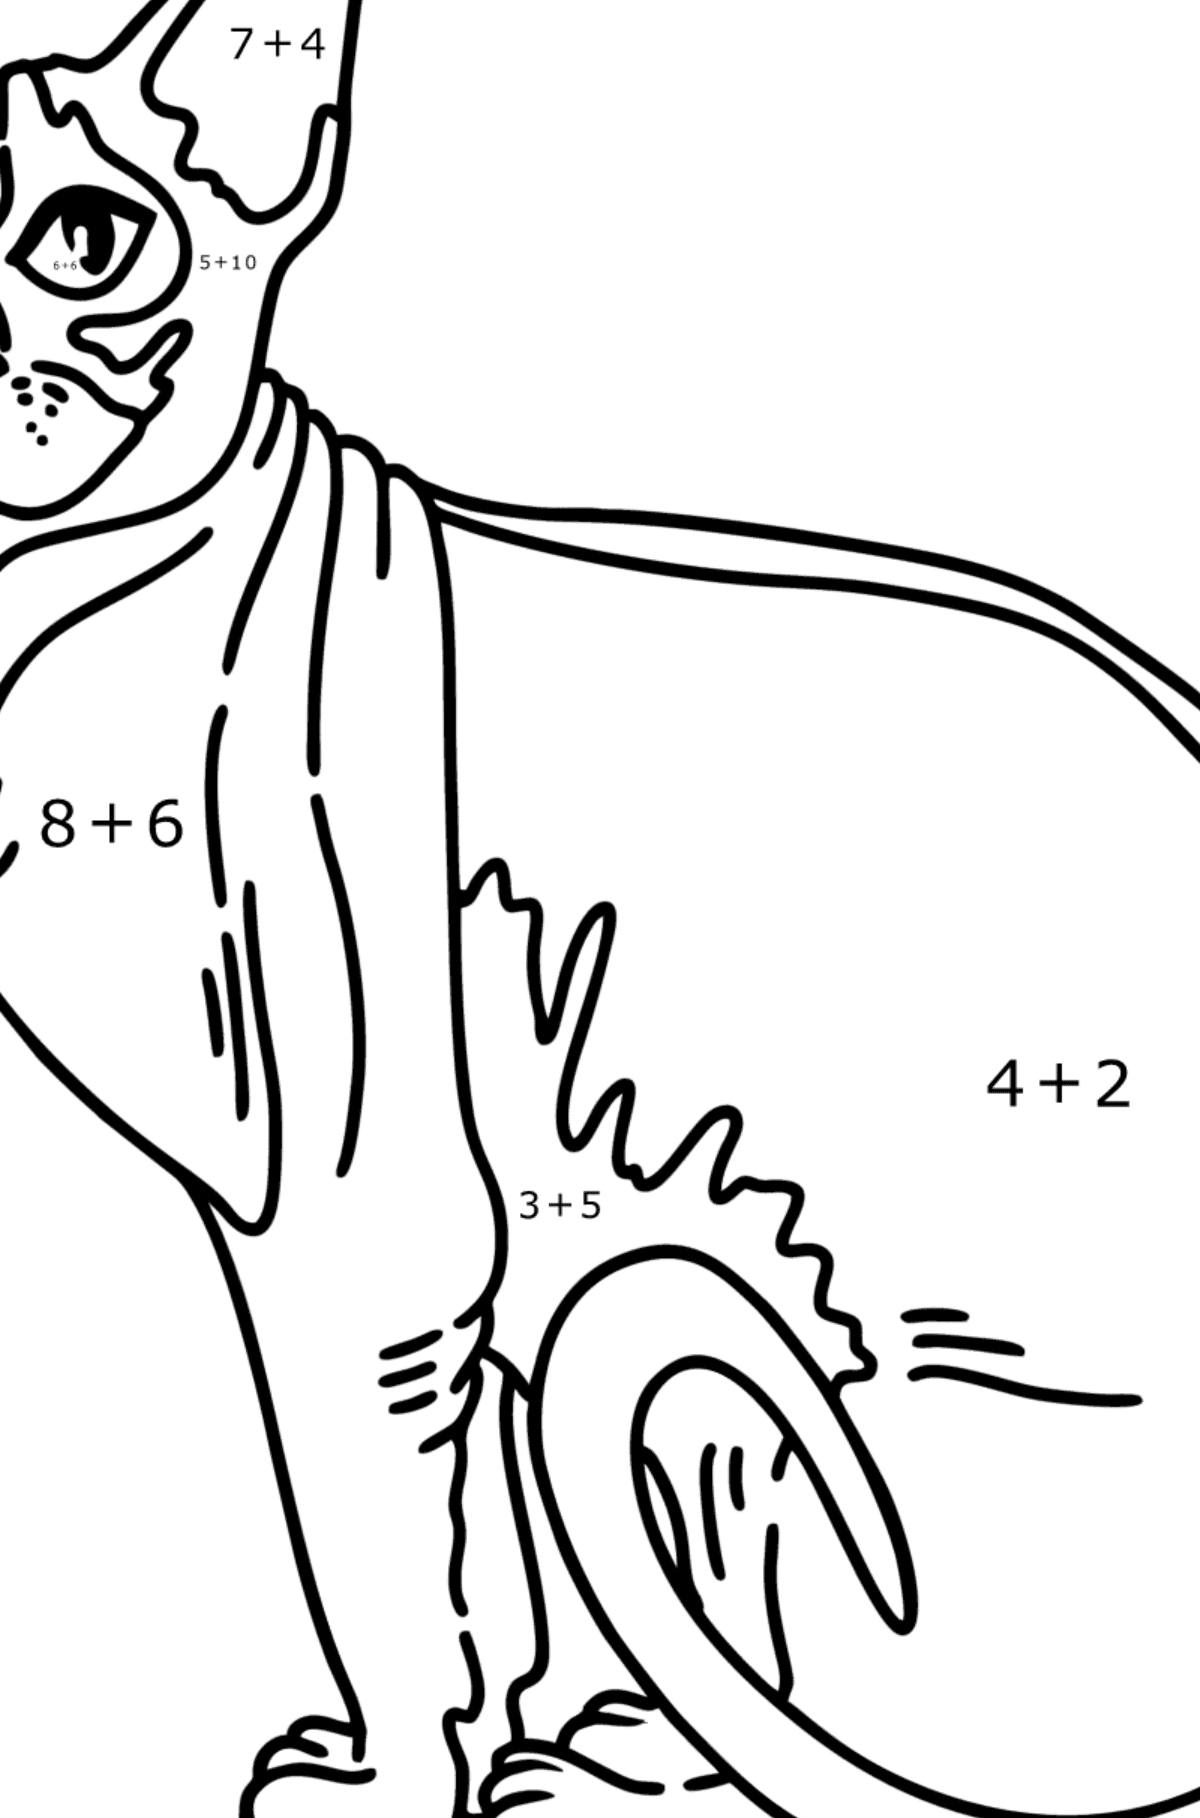 Sphynx Cat coloring page - Math Coloring - Addition for Kids